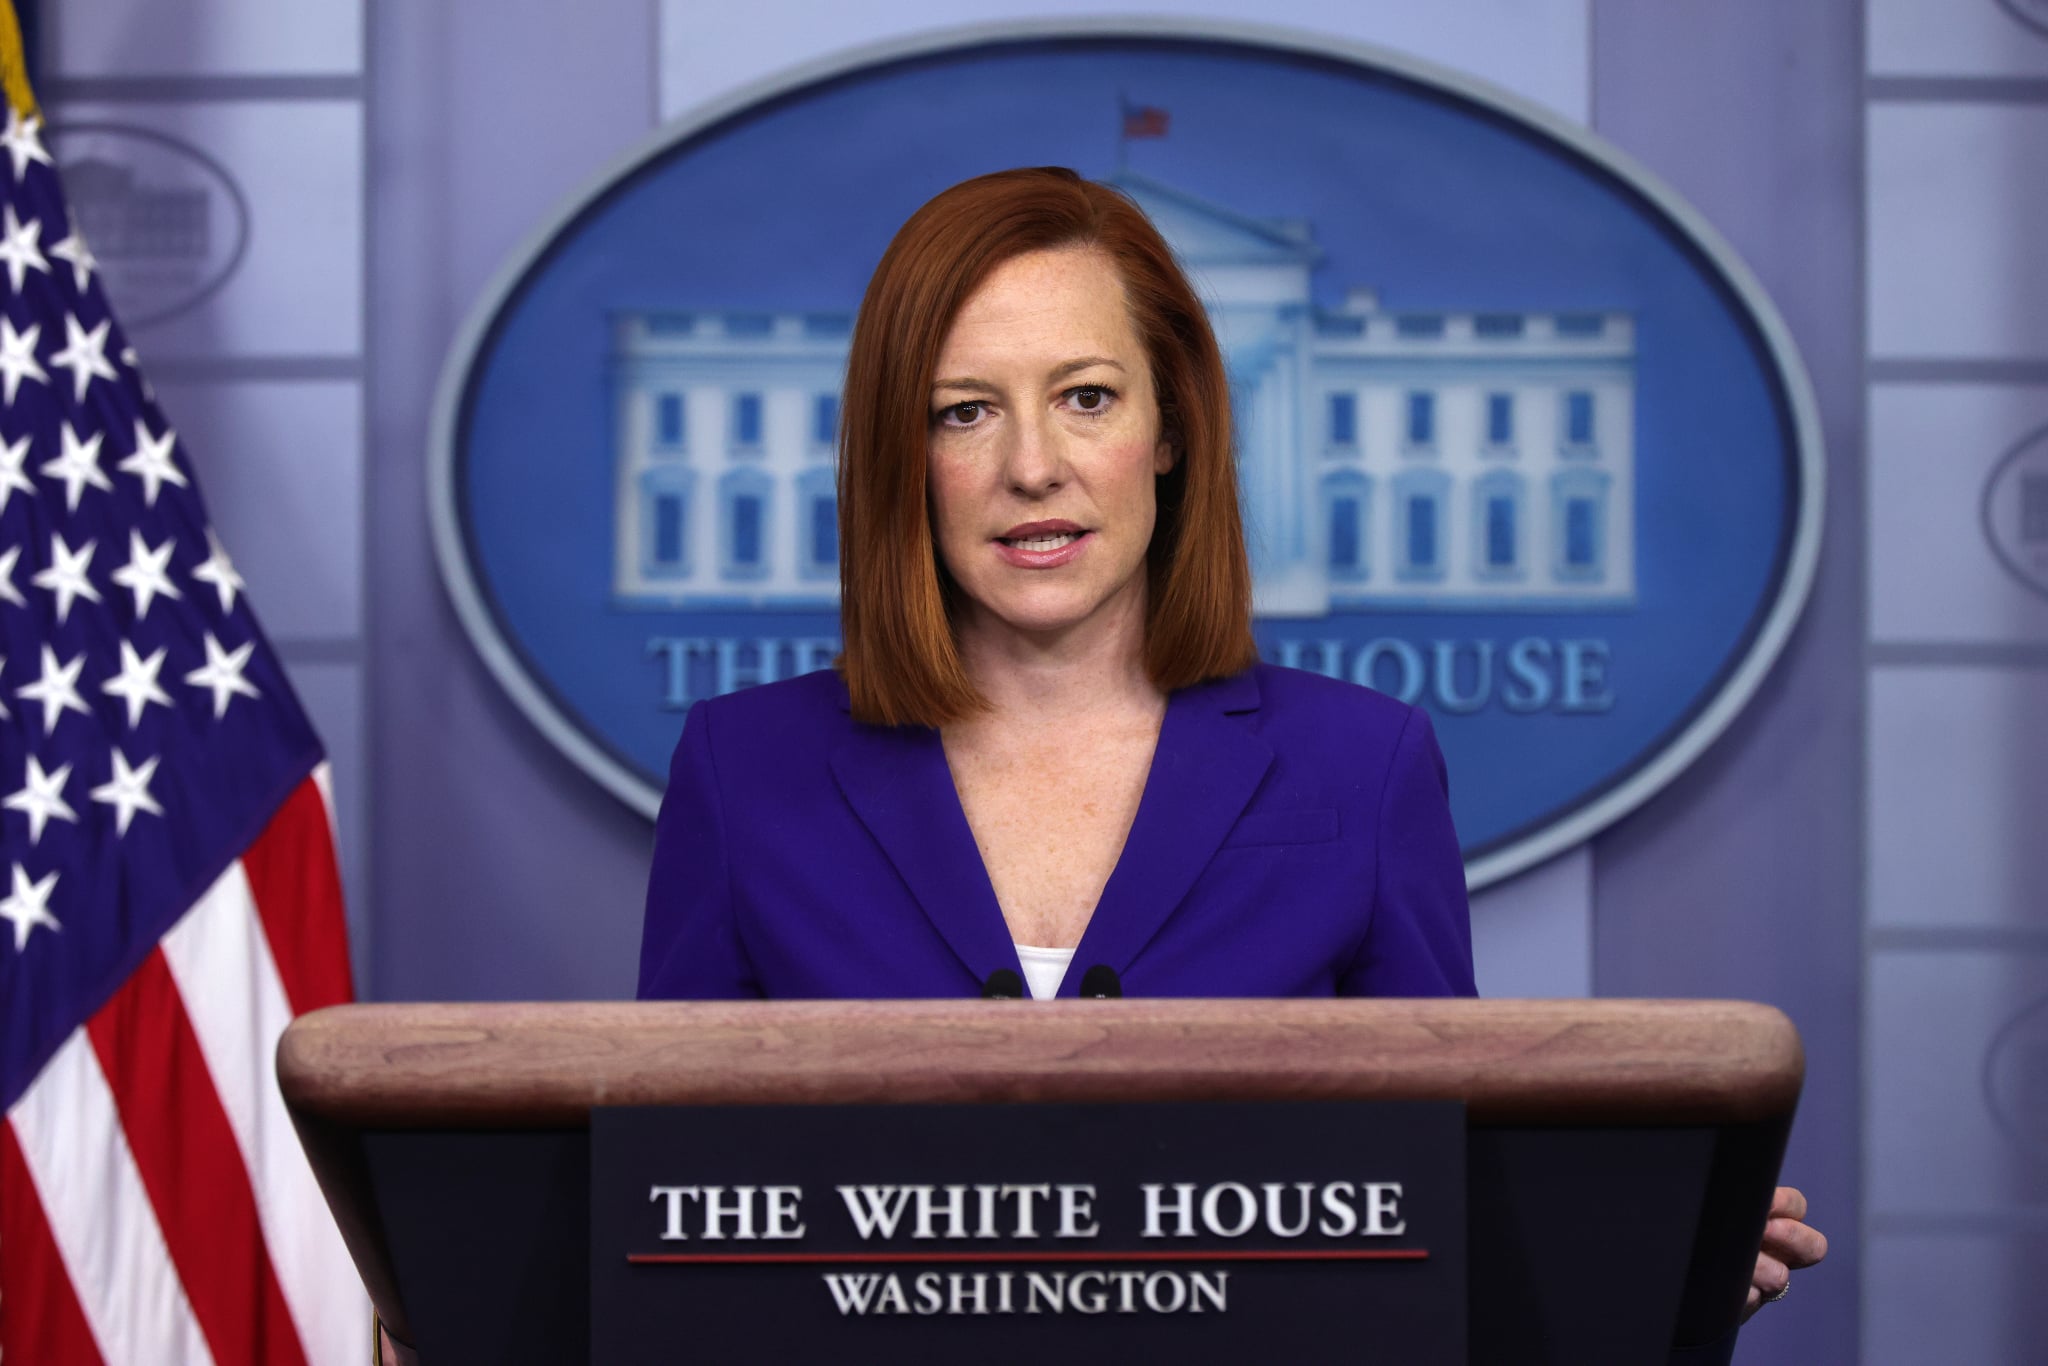 WASHINGTON, DC - MARCH 08:  White House Press Secretary Jen Psaki speaks during a daily press briefing at the James Brady Press Briefing Room of the White House March 8, 2021 in Washington, DC. Psaki held a briefing to answer questions from members of the press. (Photo by Alex Wong/Getty Images)